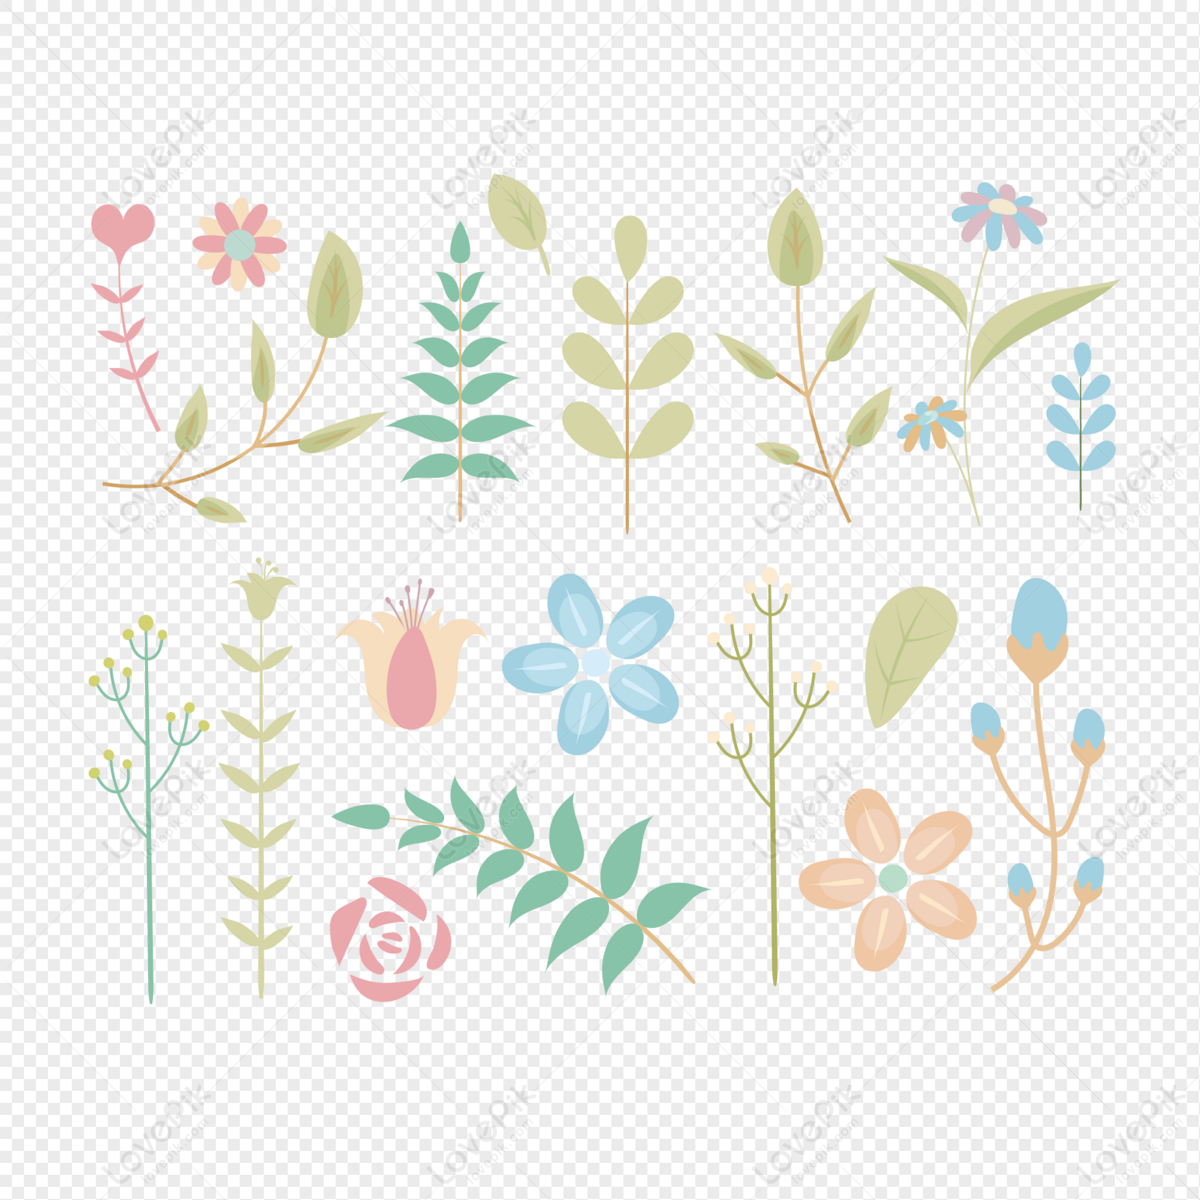 Flower Green Plant Element PNG Transparent And Clipart Image For Free ...